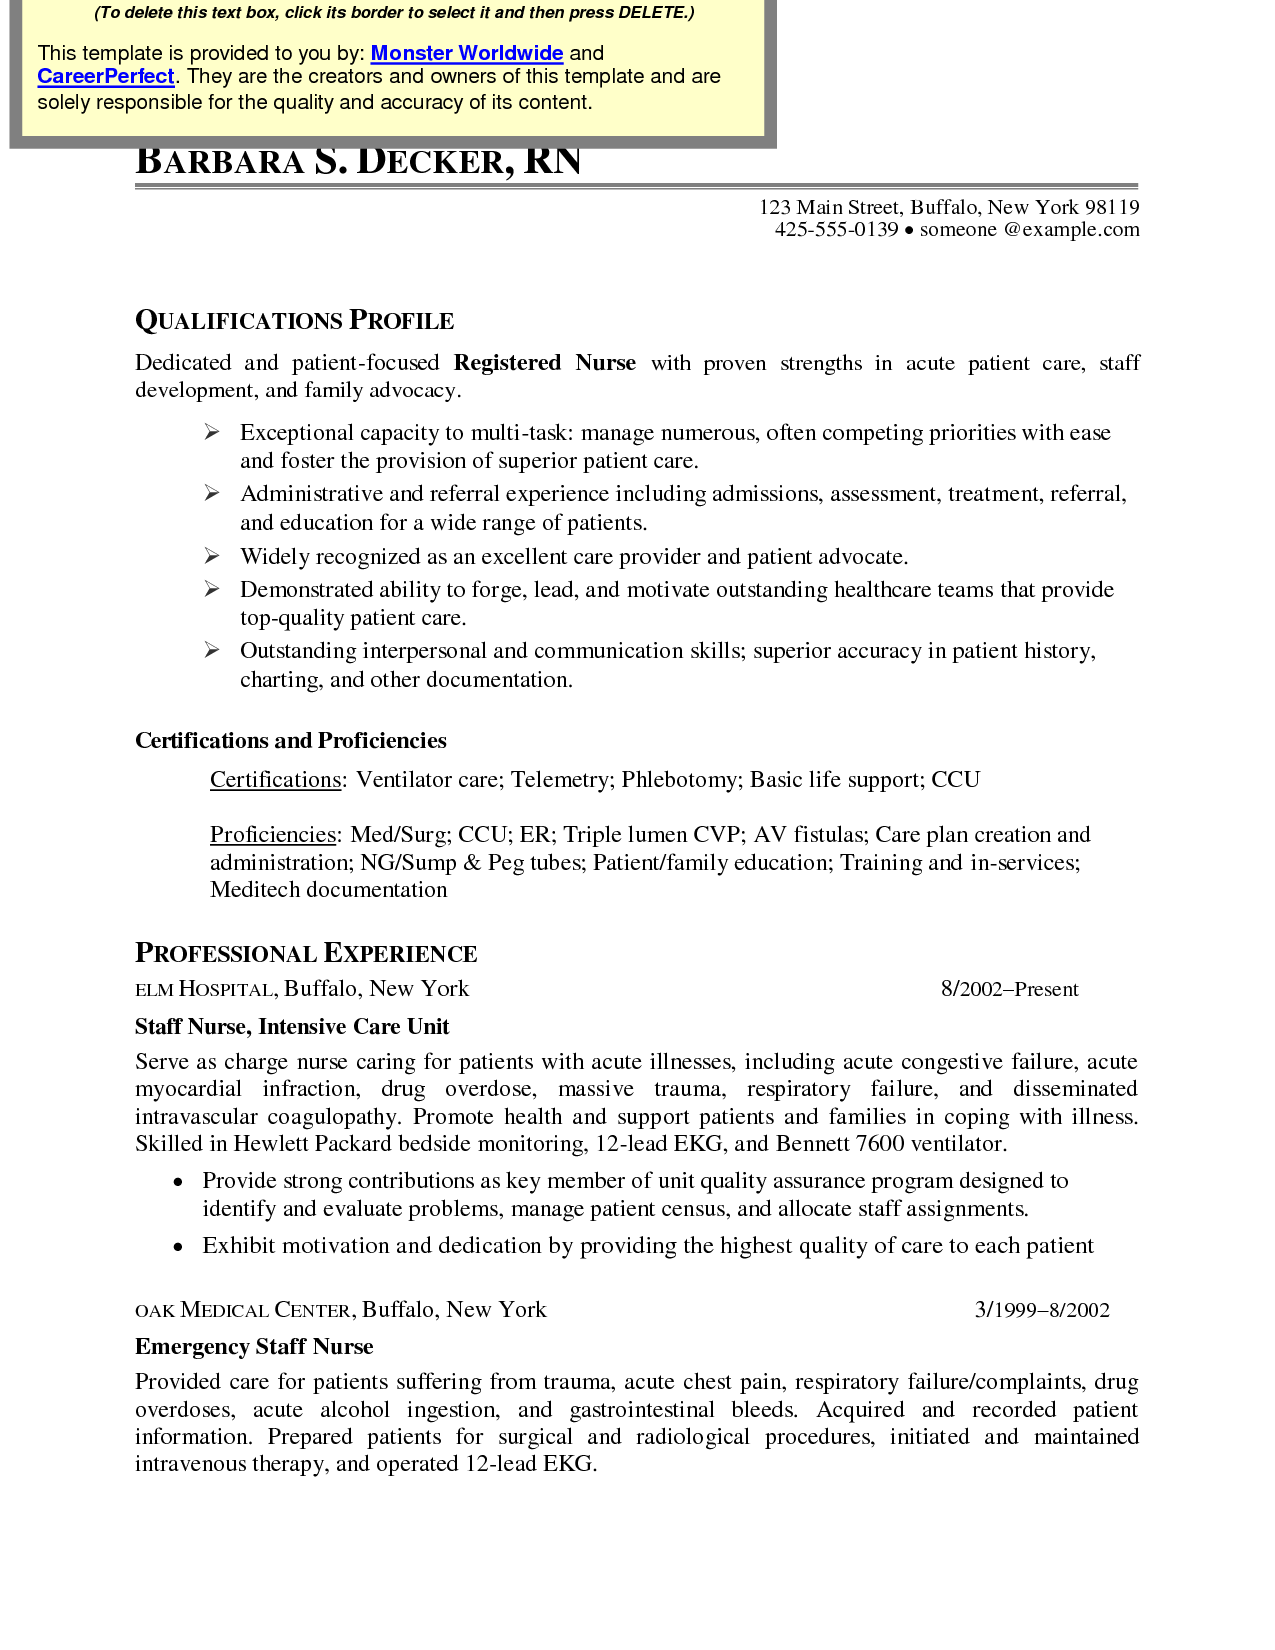 Brilliant Ideas Of Magnificent Resume Templates for Registered 